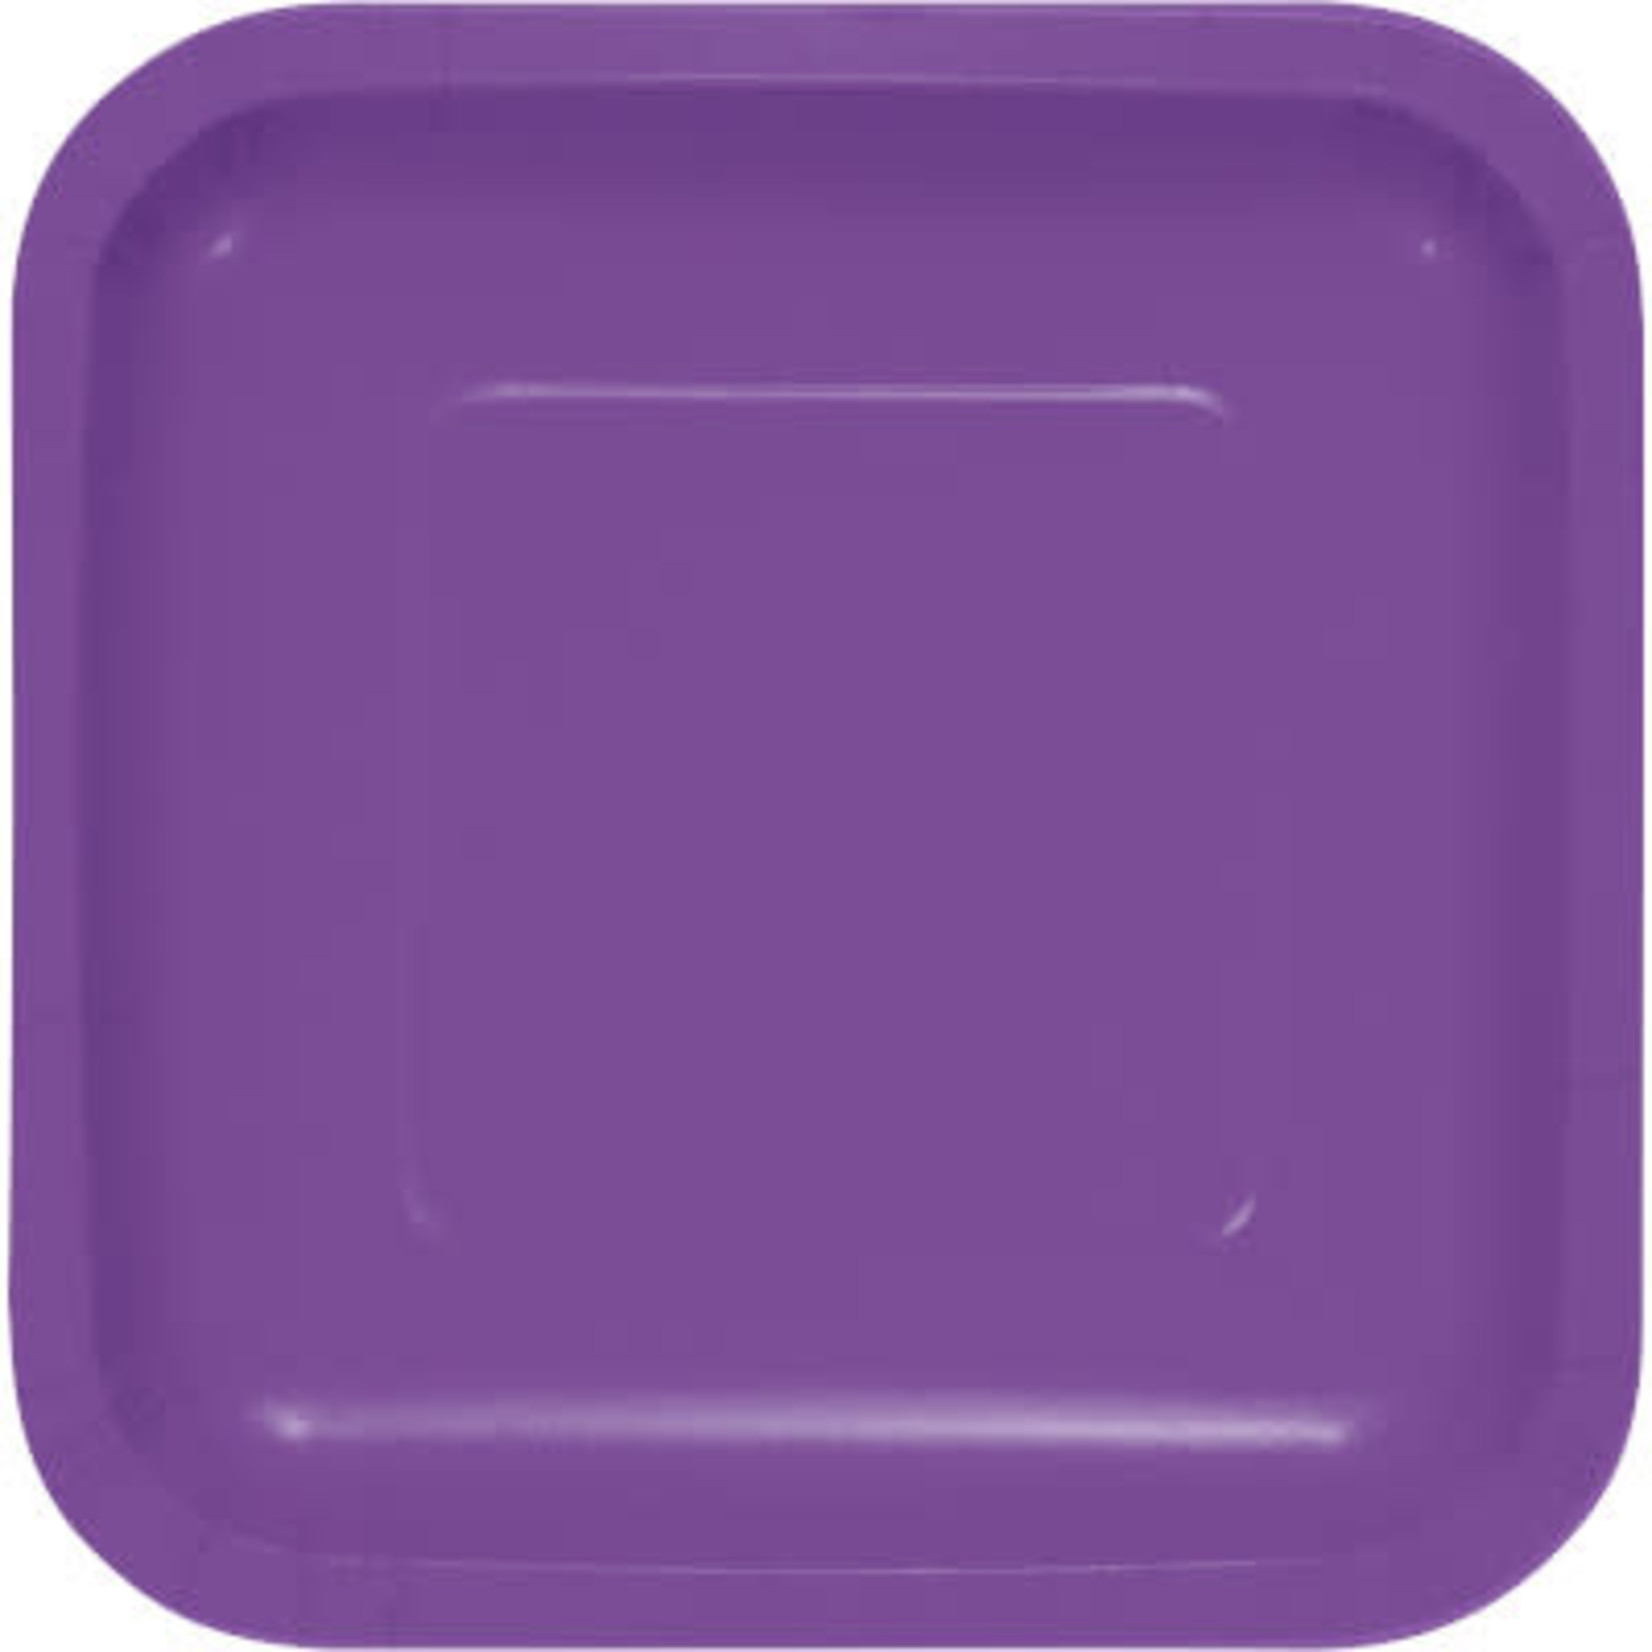 Touch of Color 7" Amethyst Purple Square Paper Plates - 18ct.